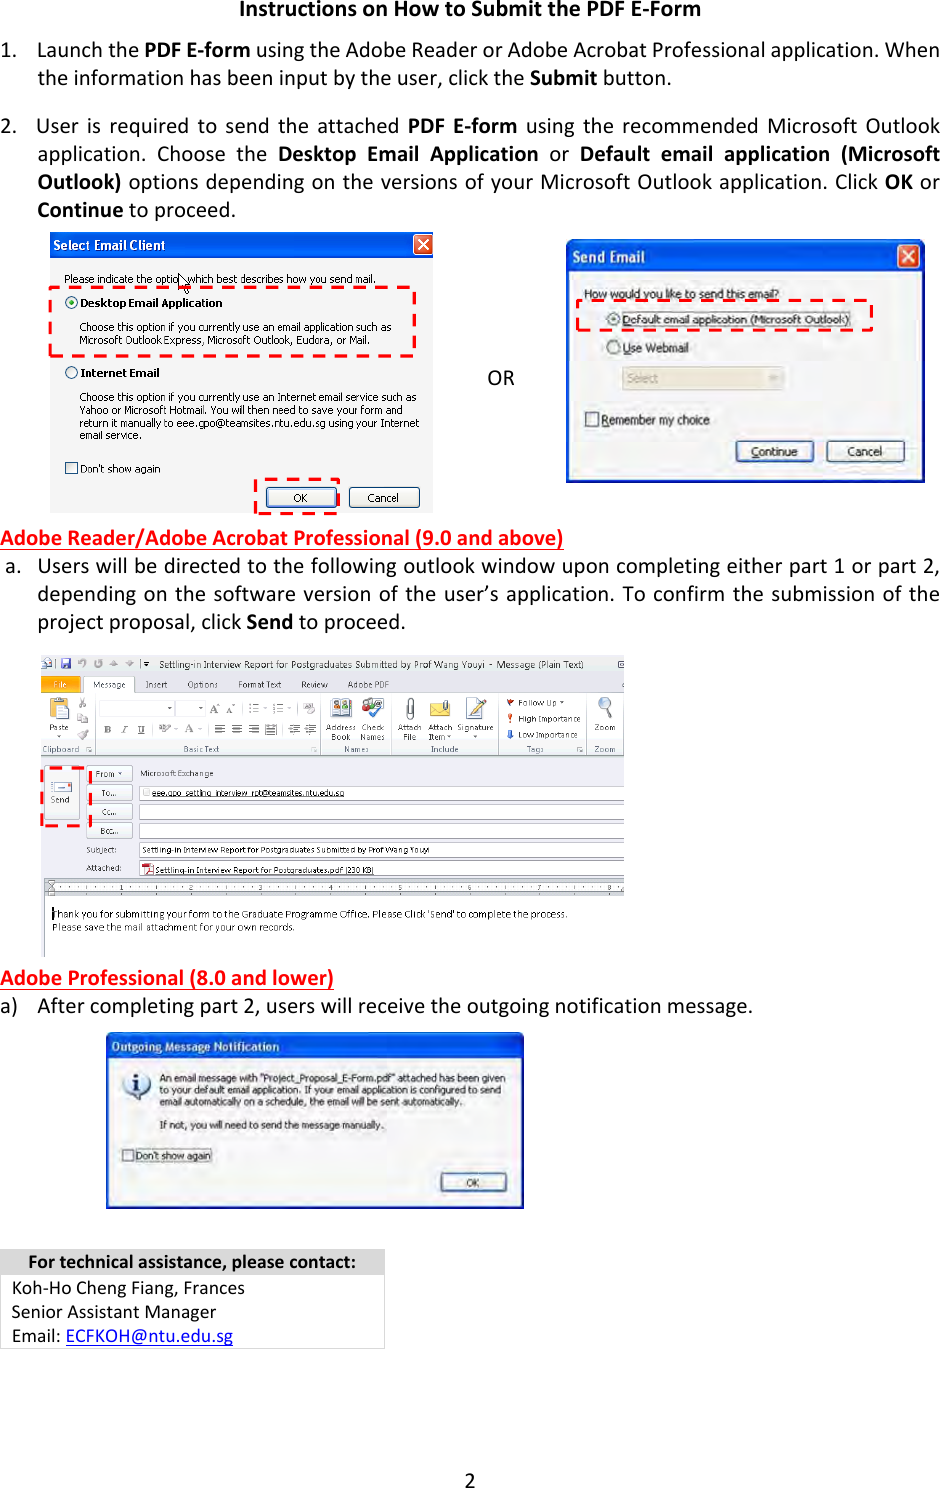 Page 2 of 2 - Instructions_on_How_To_AttachFiles_and_Submit_PDF-EForms Instructions On How To Attach Files And Submit PDF-EForms